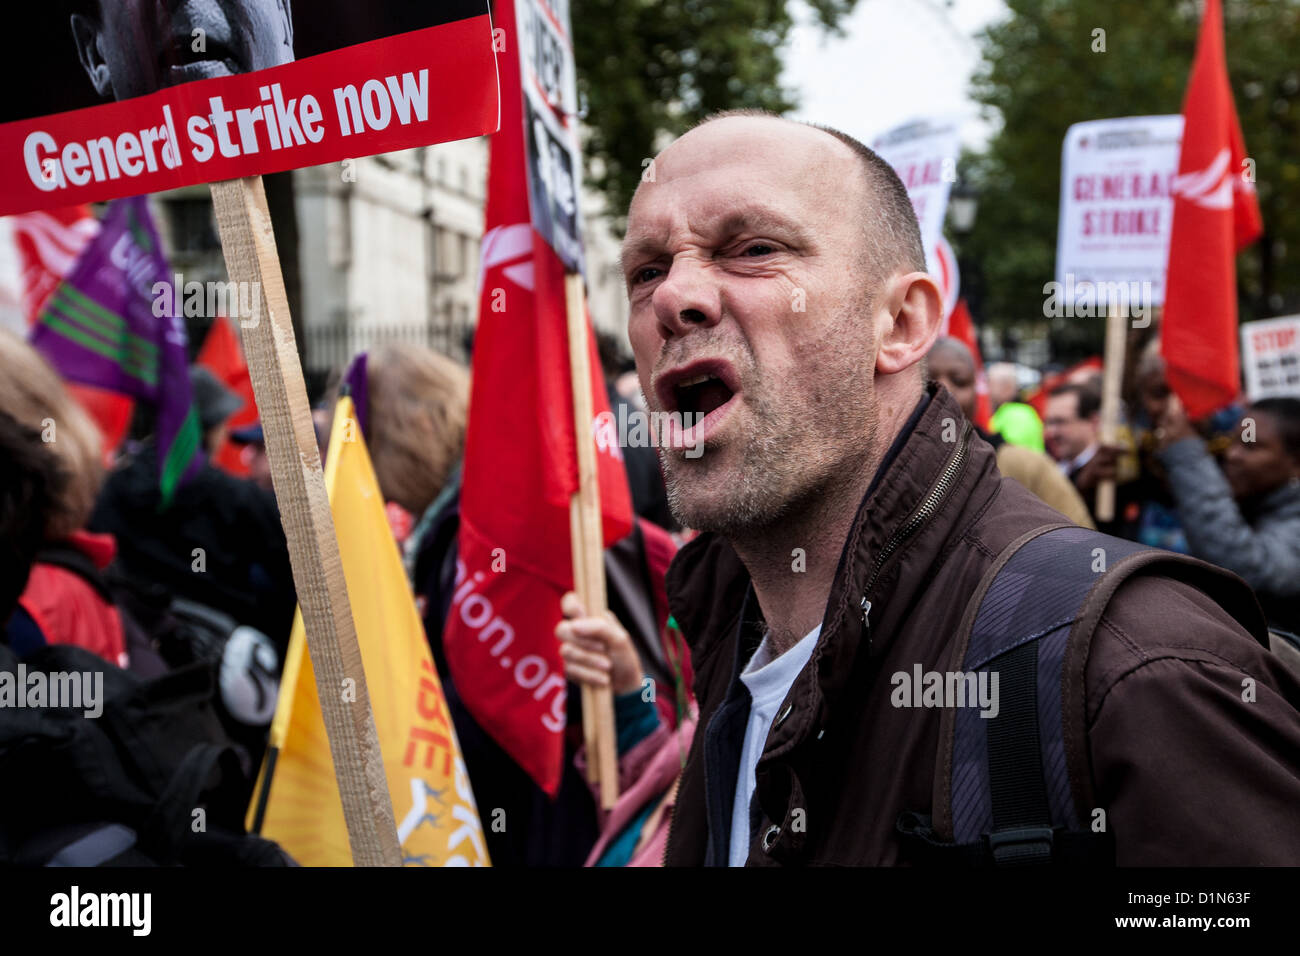 Angry Protester Stock Photos & Angry Protester Stock Images - Alamy